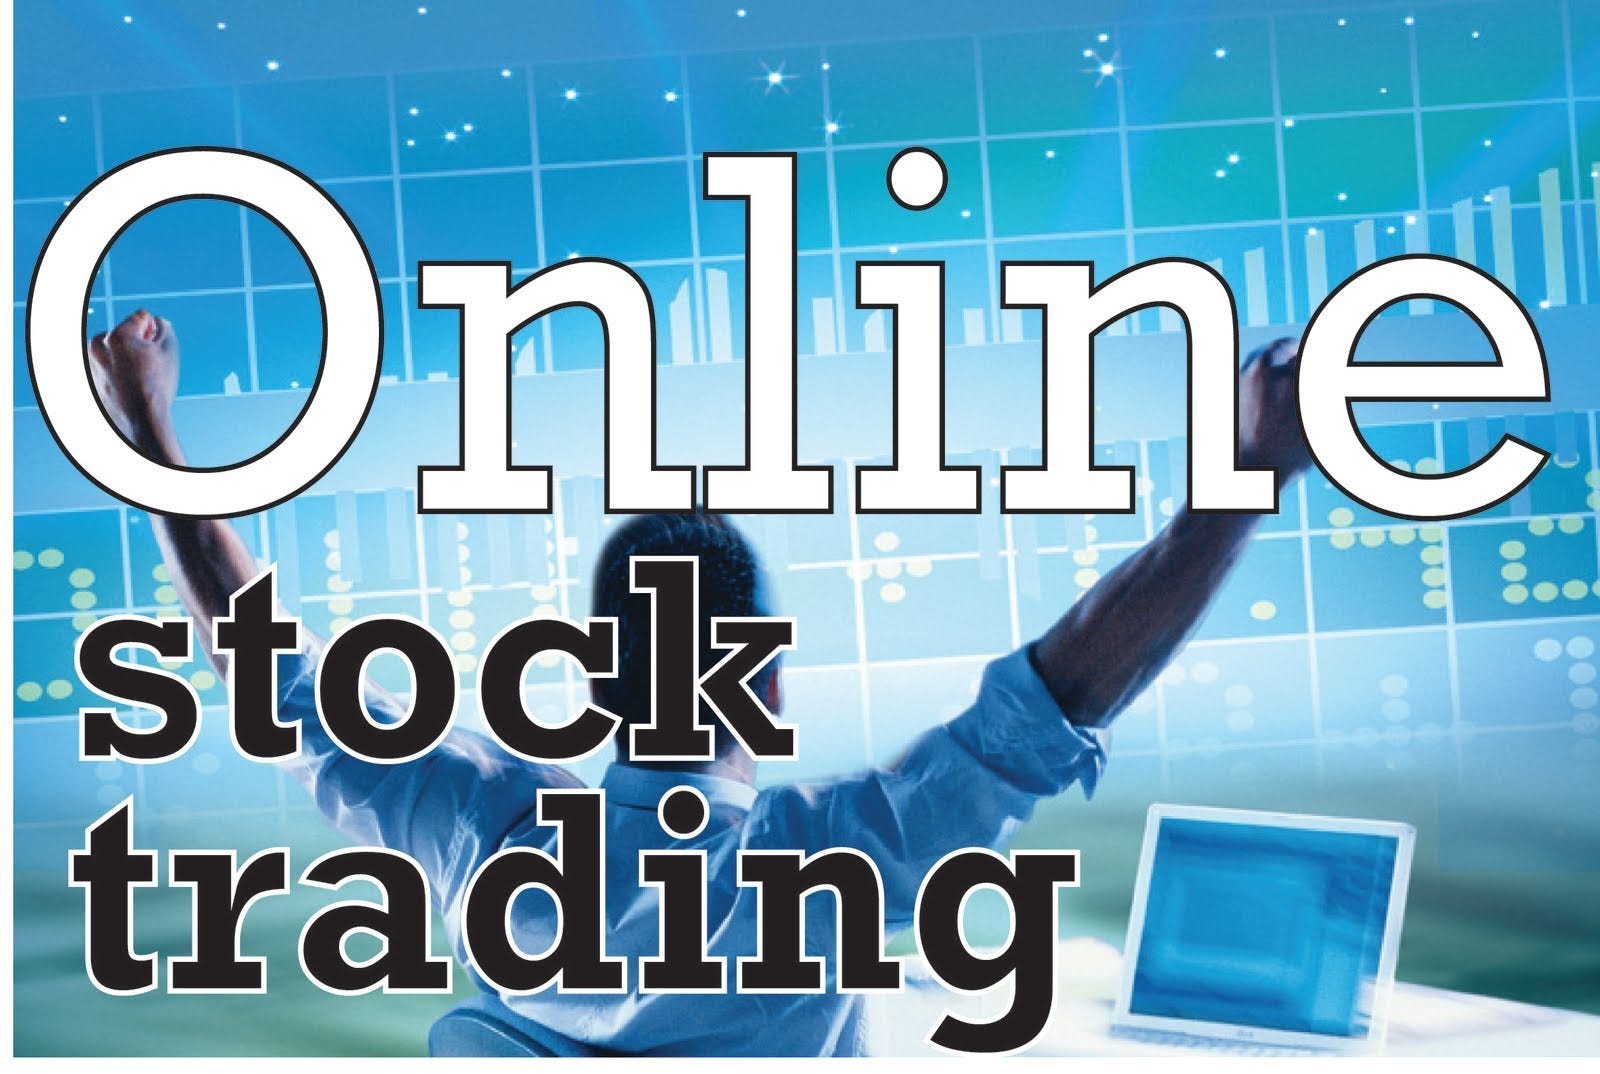 FREE ONLINE STOCK TRADING SERVICES